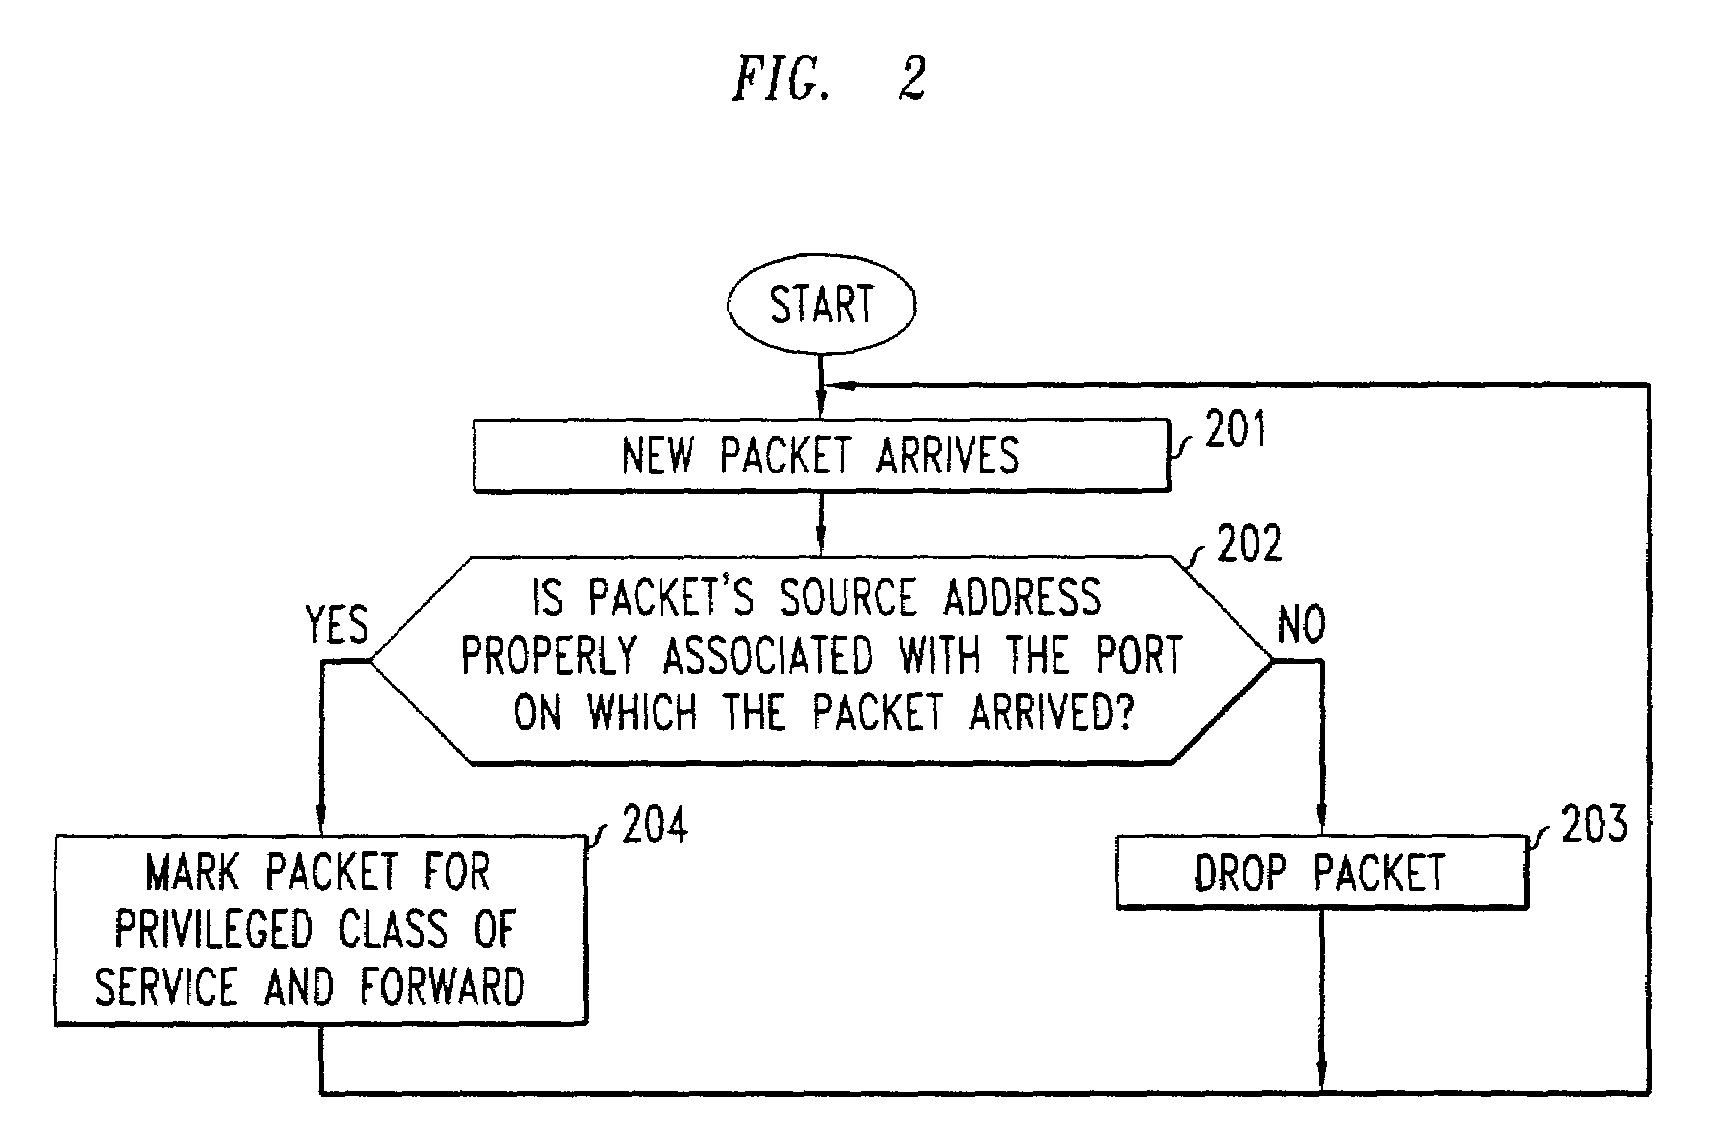 Method and apparatus for incrementally deploying ingress filtering on the internet